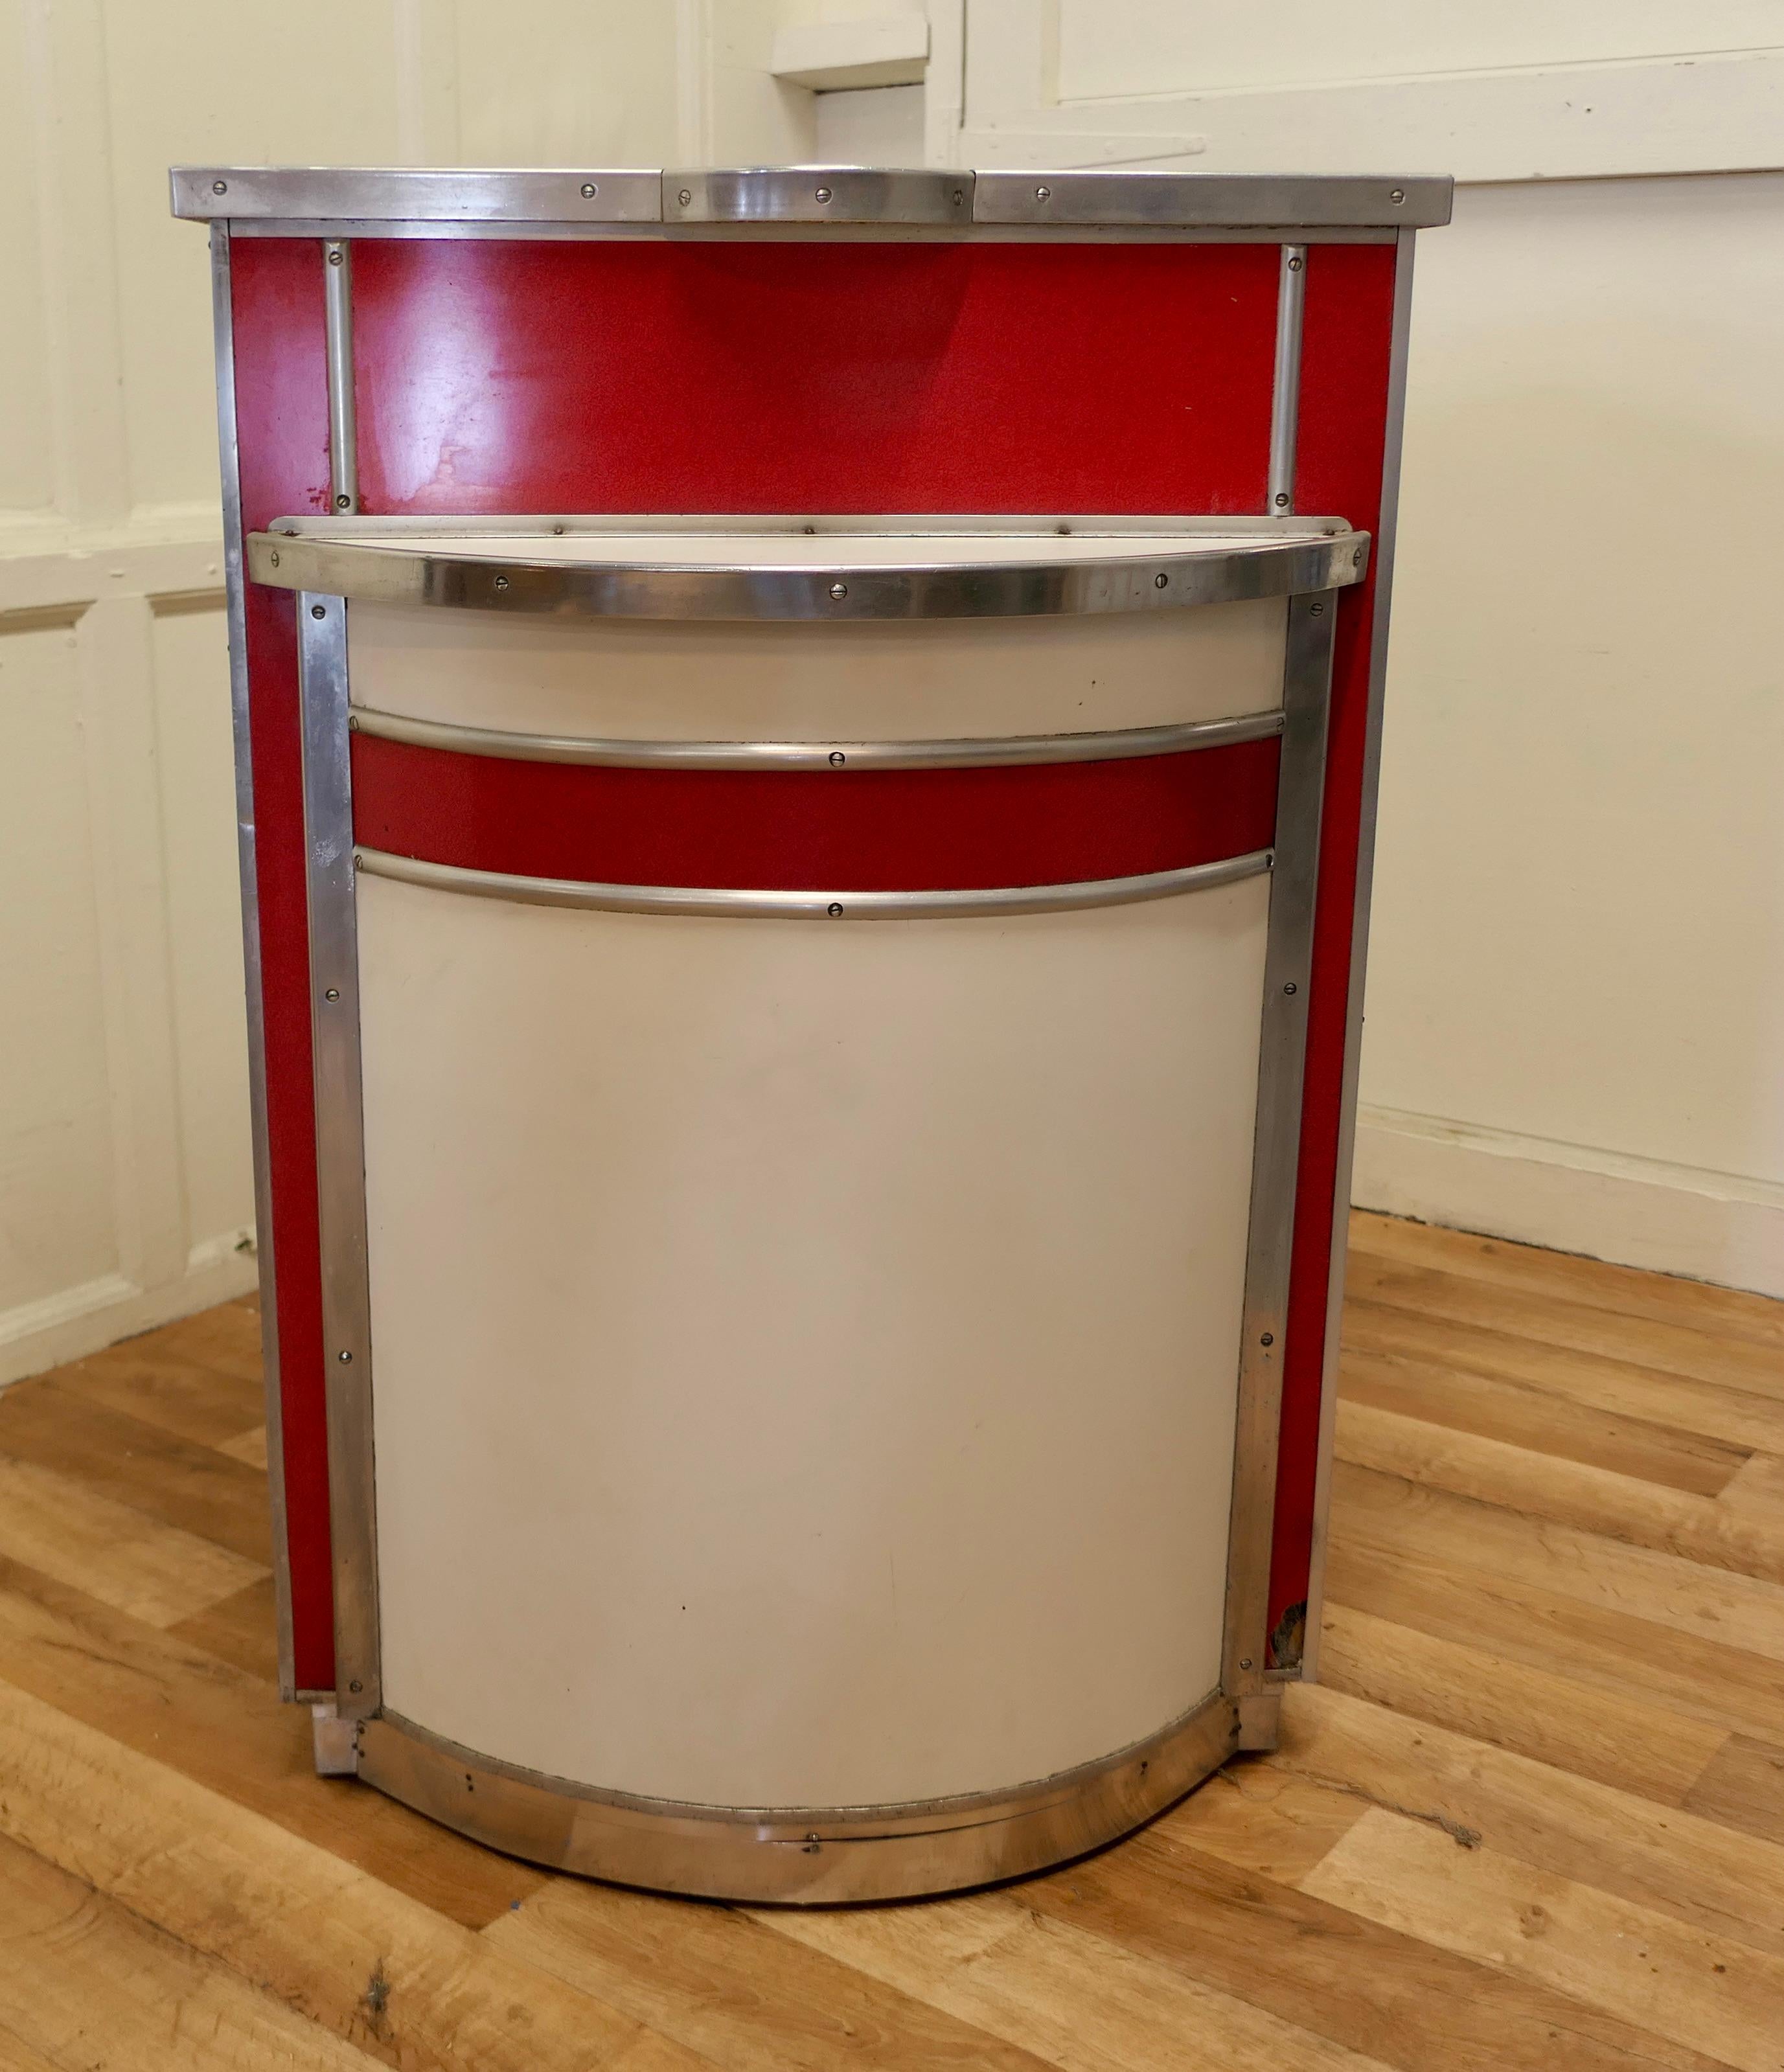 Red 1950s Retro Hostess Greeting Station, Greeter

A superb and extremely rare piece, the greeter comes from a trucker’s Diner, it is finished in very striking Red and White Formica with a shiny aluminium  trim
The Classic design of this piece is